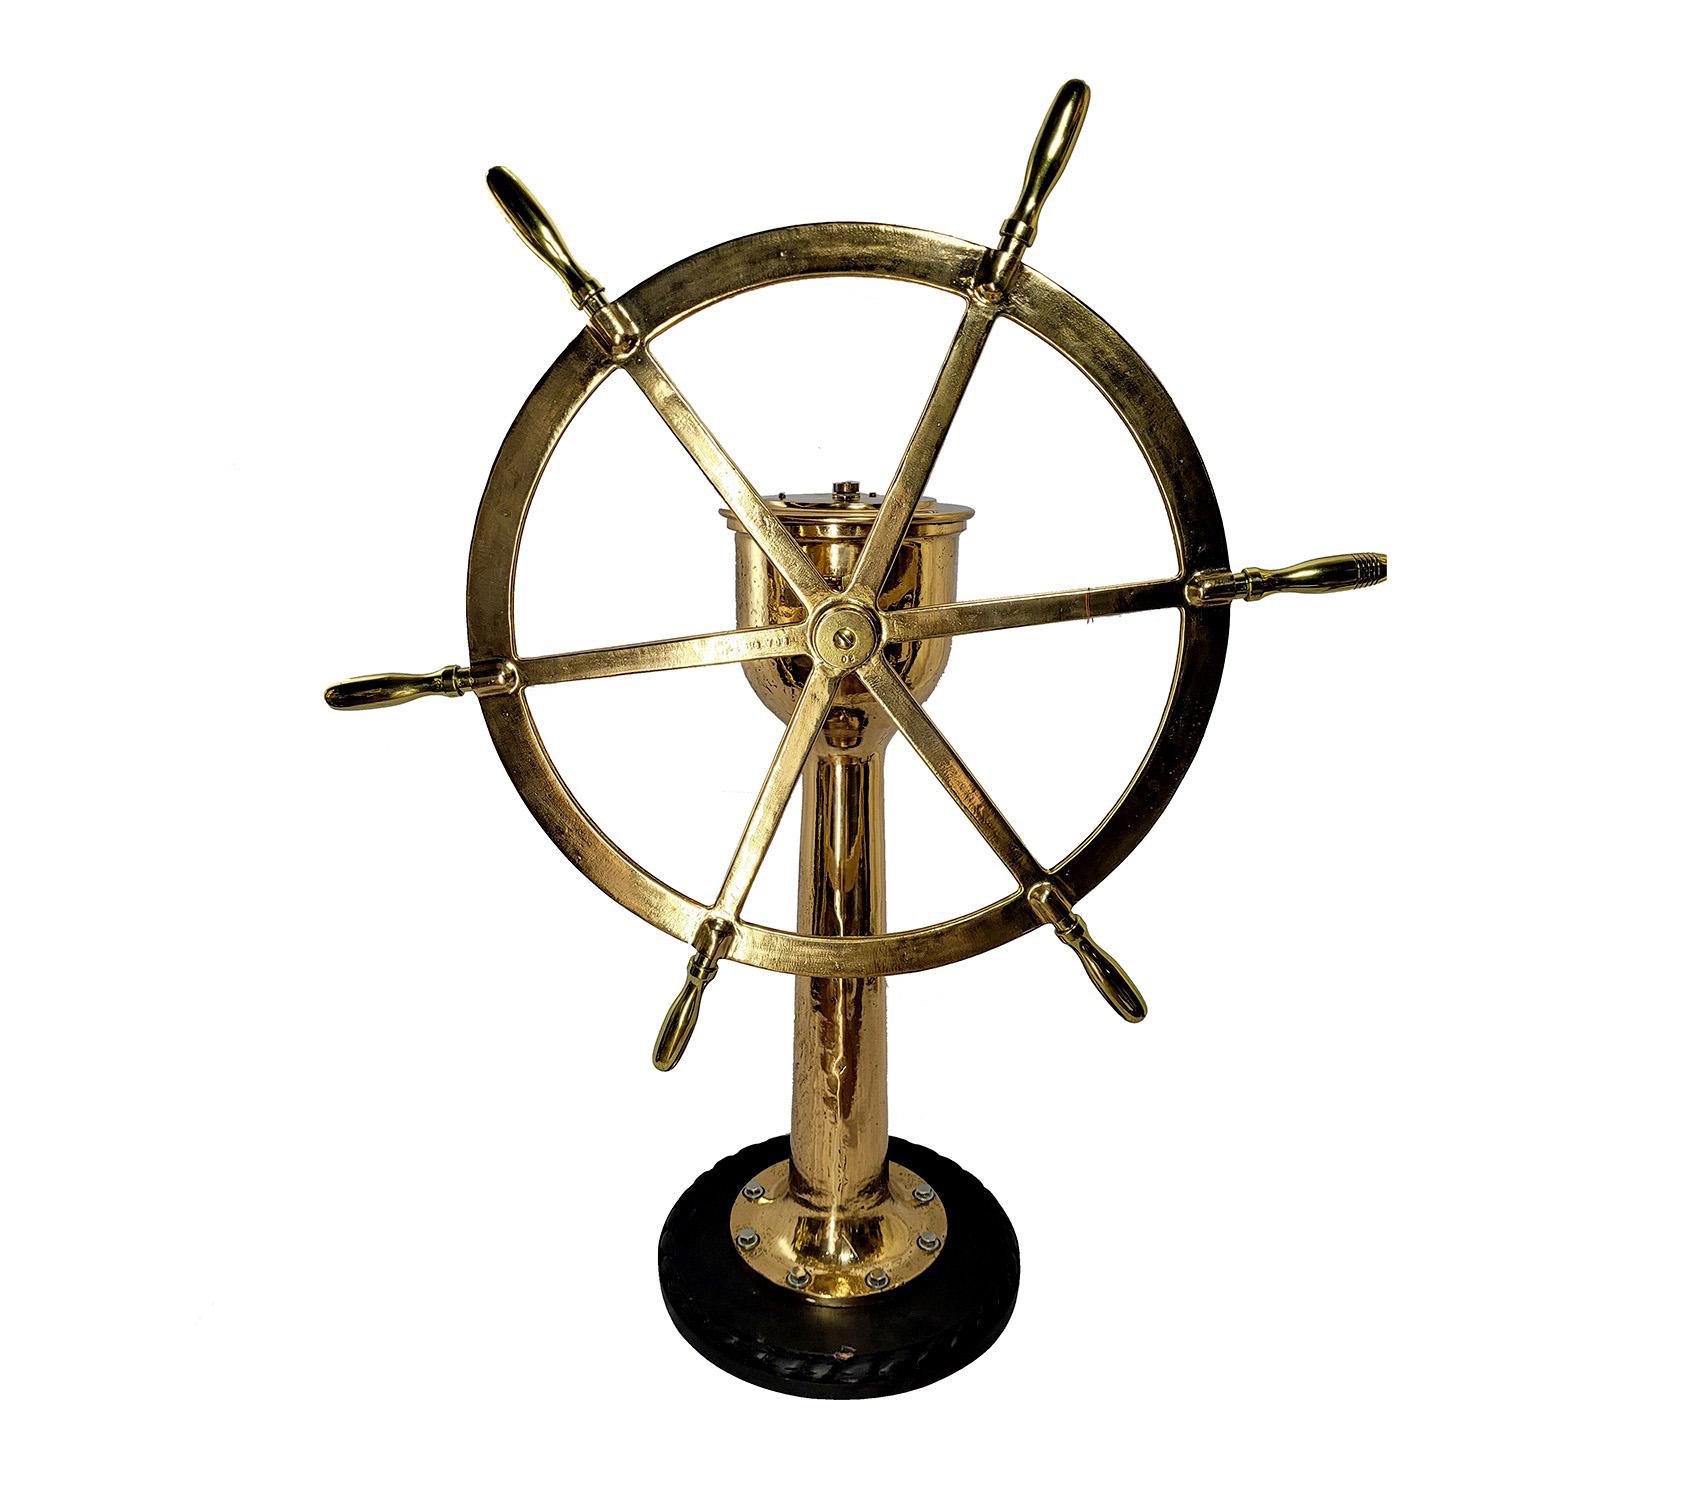 Solid brass six spoke ships wheel on pedestal. Very heavy piece, the head is engraved AE Steering Gear, American Engineering Company, Philadelphia U.S.A. with rudder indicator arrow and degrees on head also. Internal gears are still present and turn